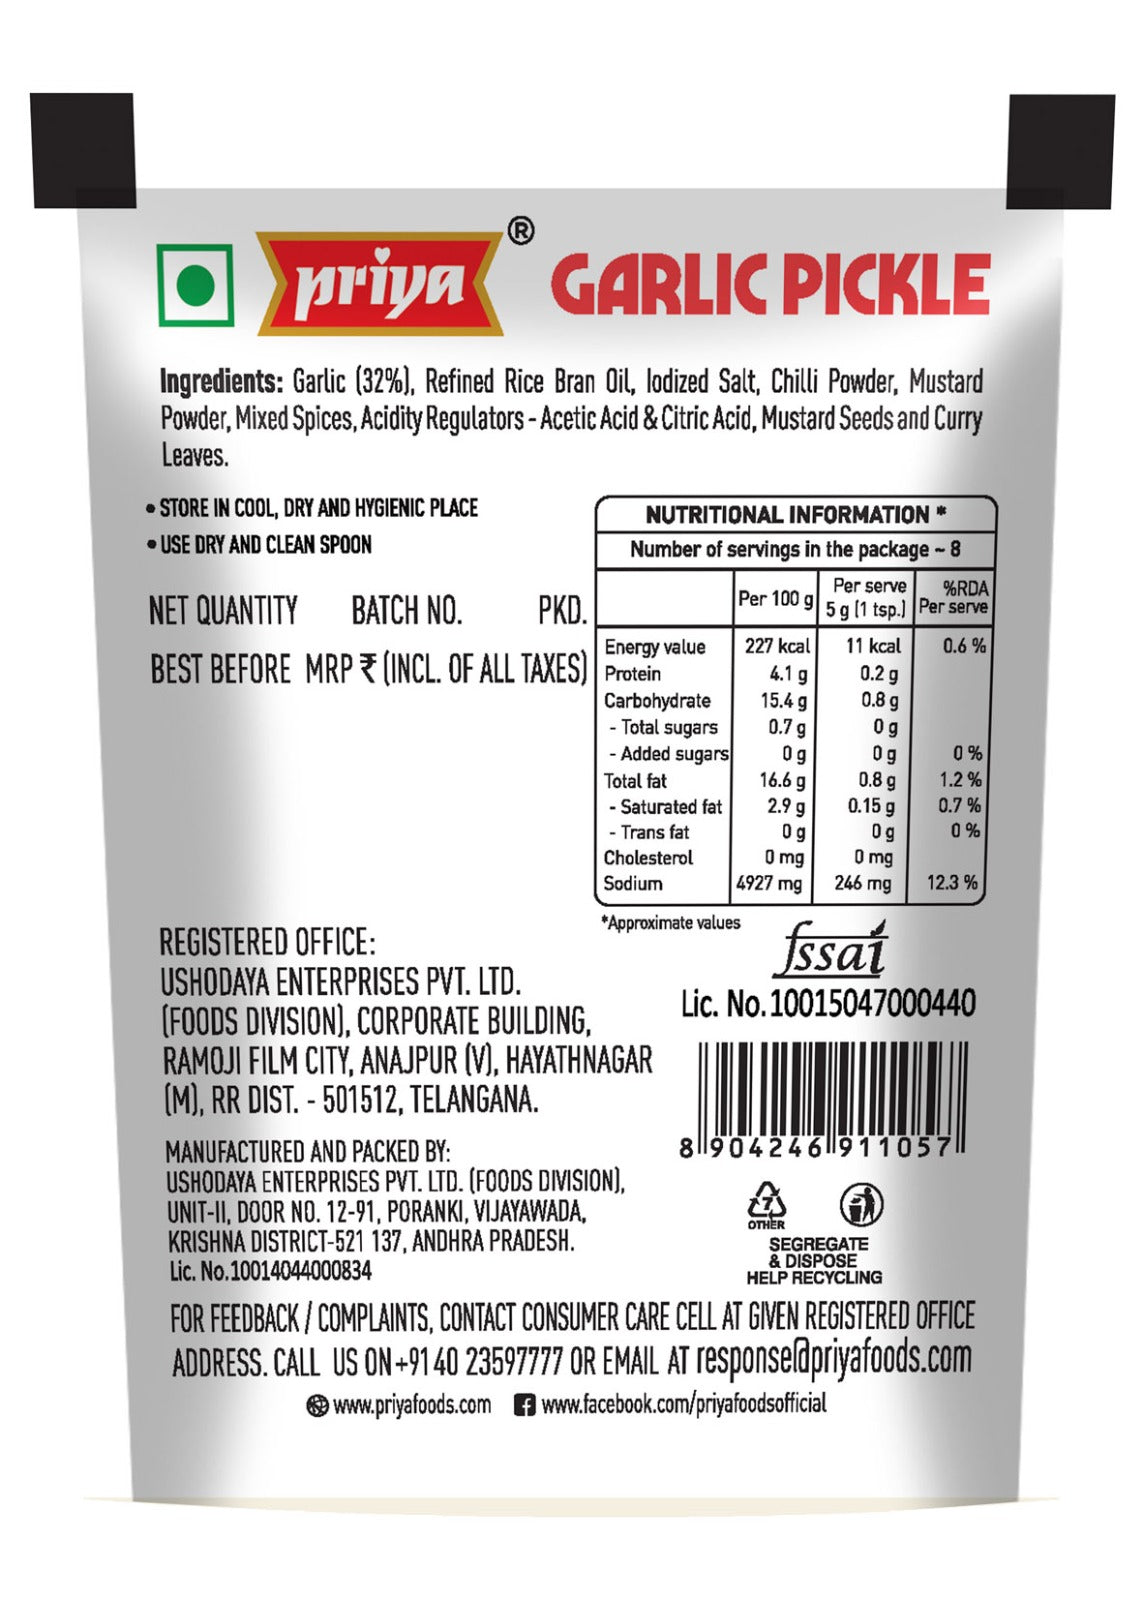 Garlic Pickle 35g Sachet(Pack of 10 pouches)